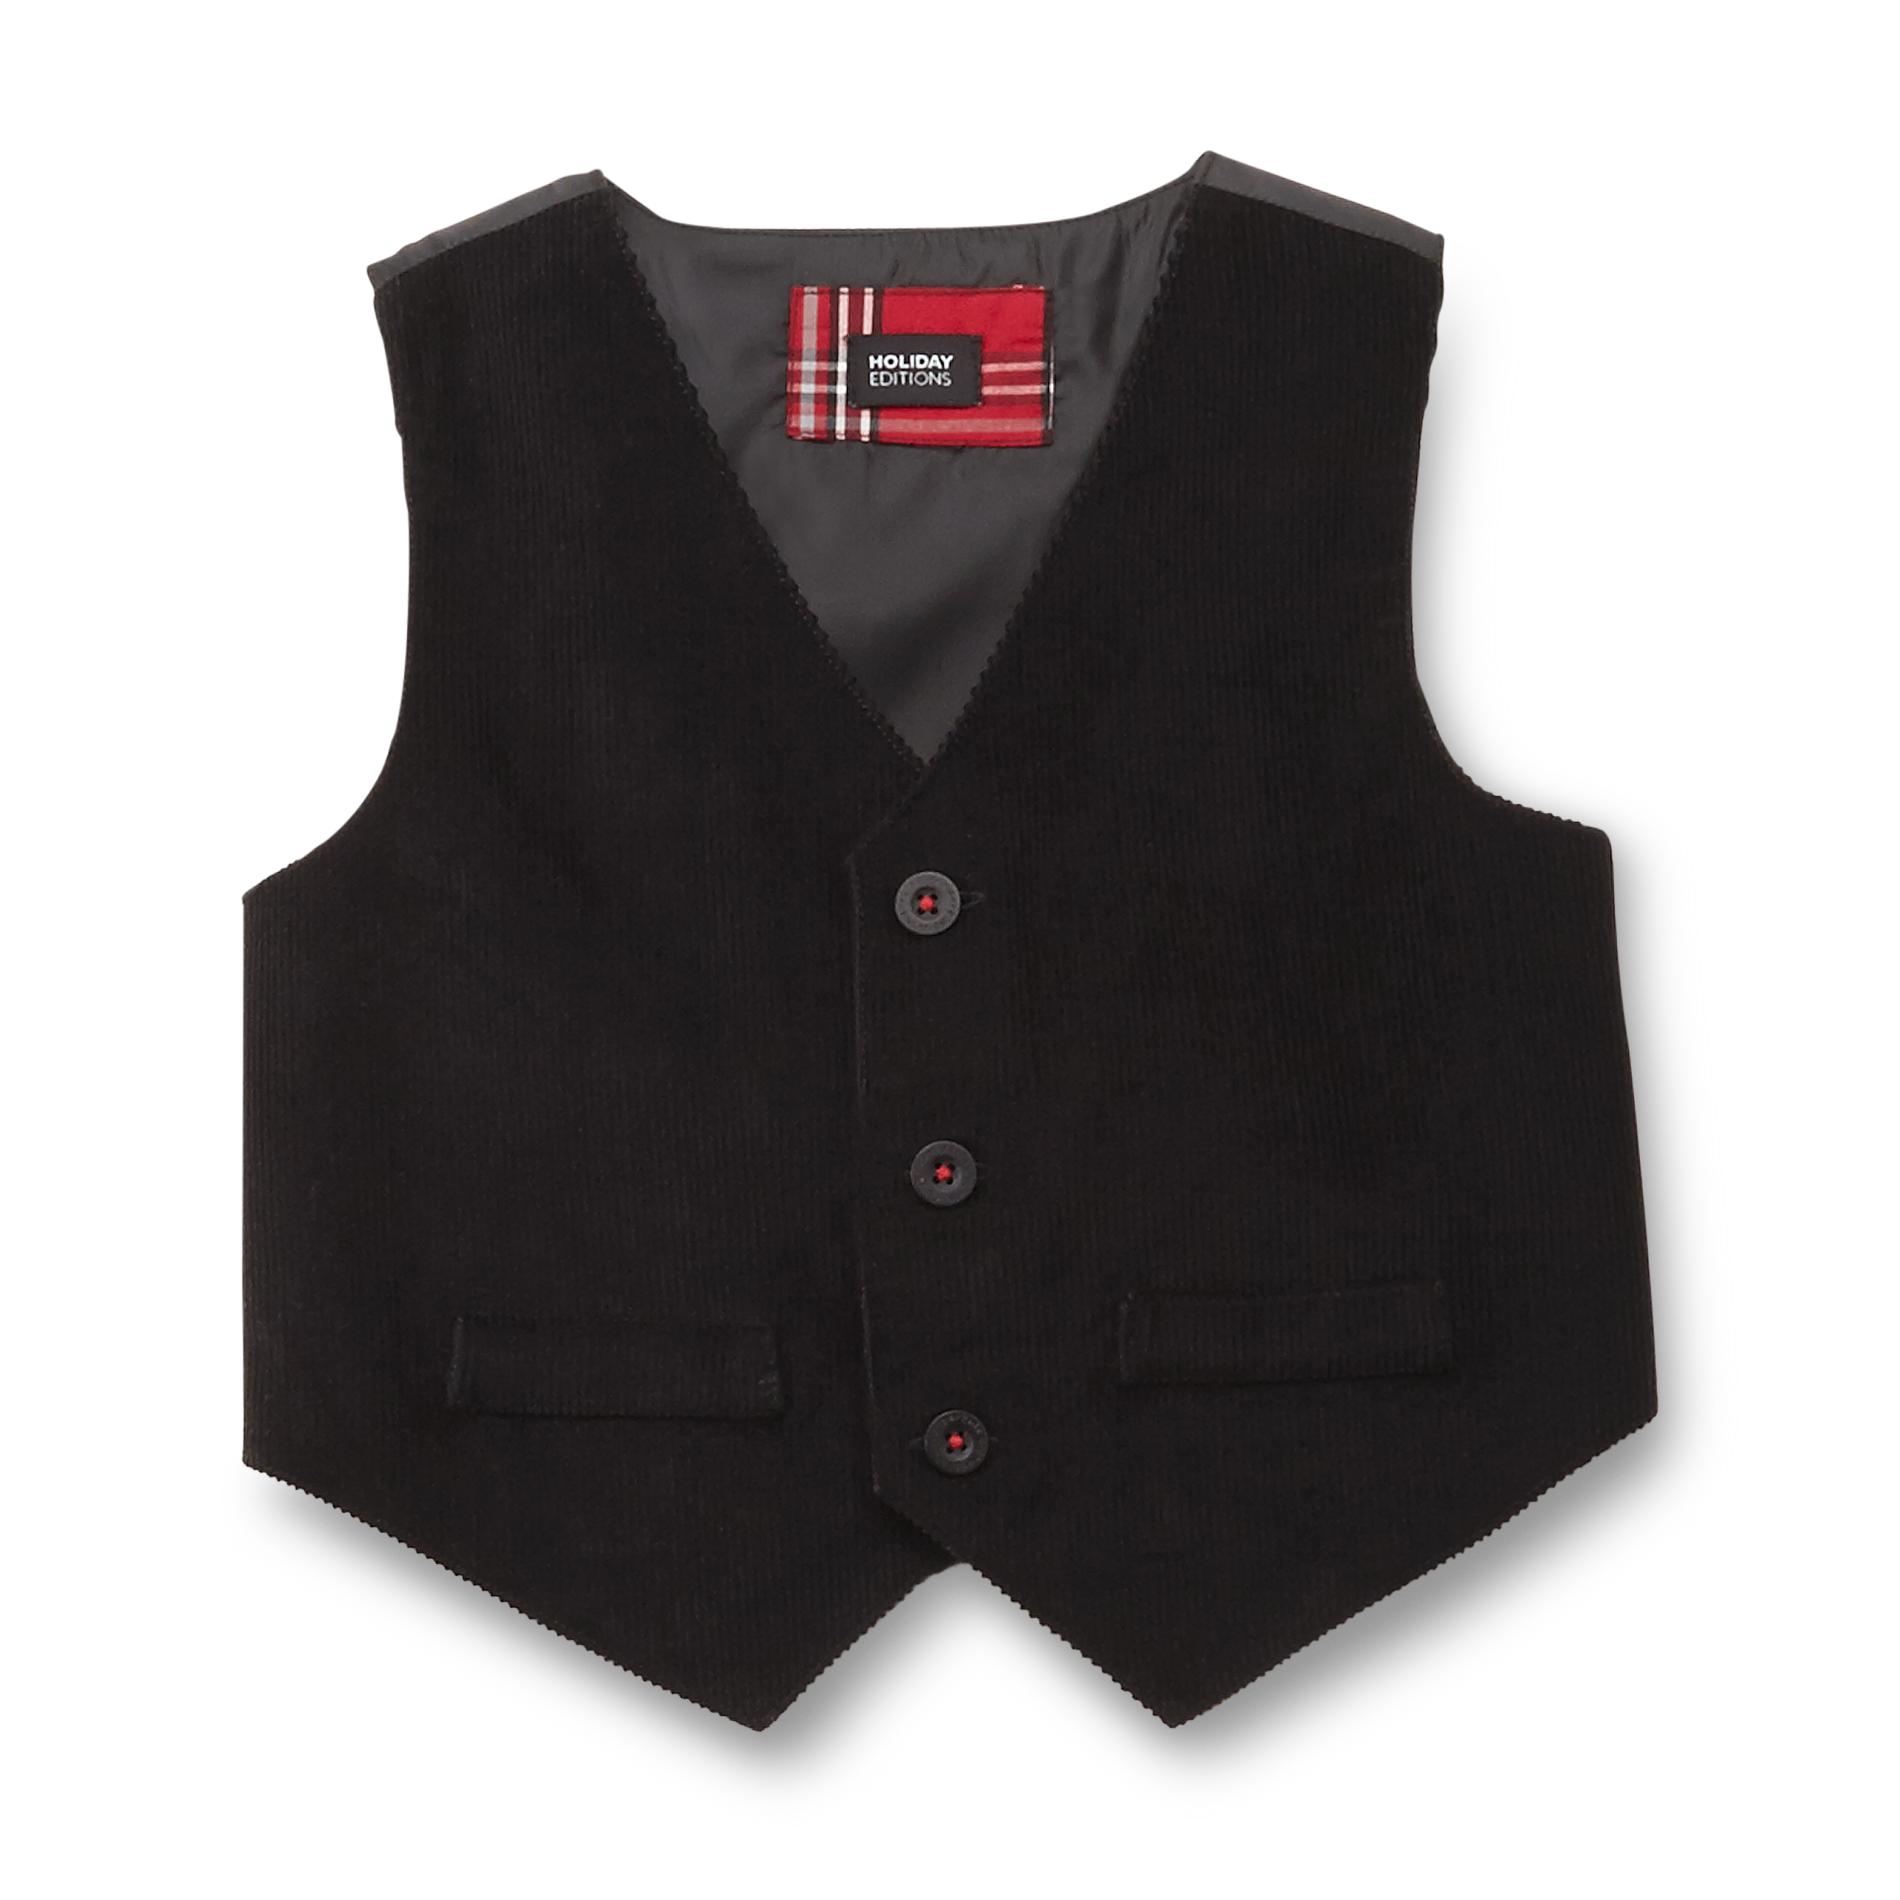 Holiday Editions Infant & Toddler Boy's Button-Front Vest